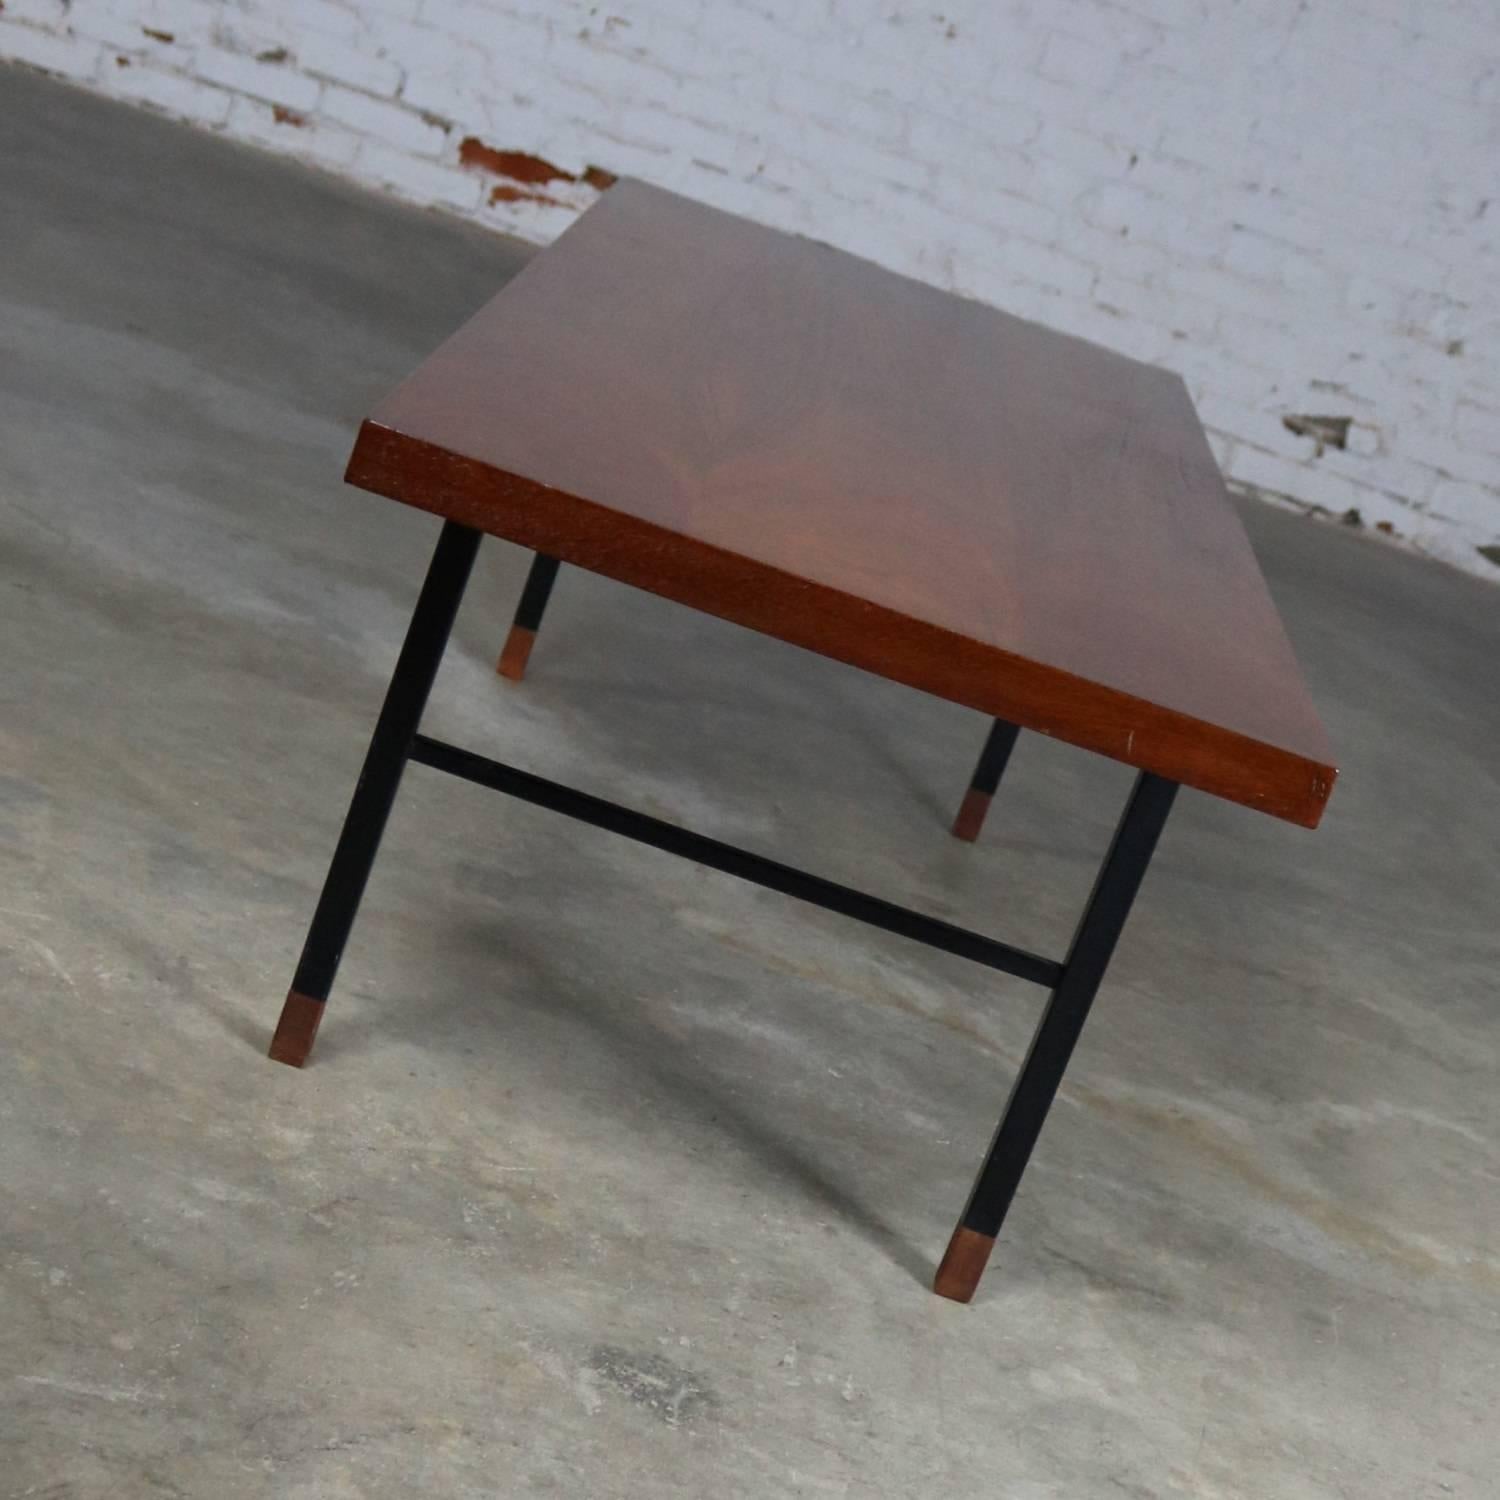 Danish Made in Denmark Coffee Table with Teak Top and Black Metal Base